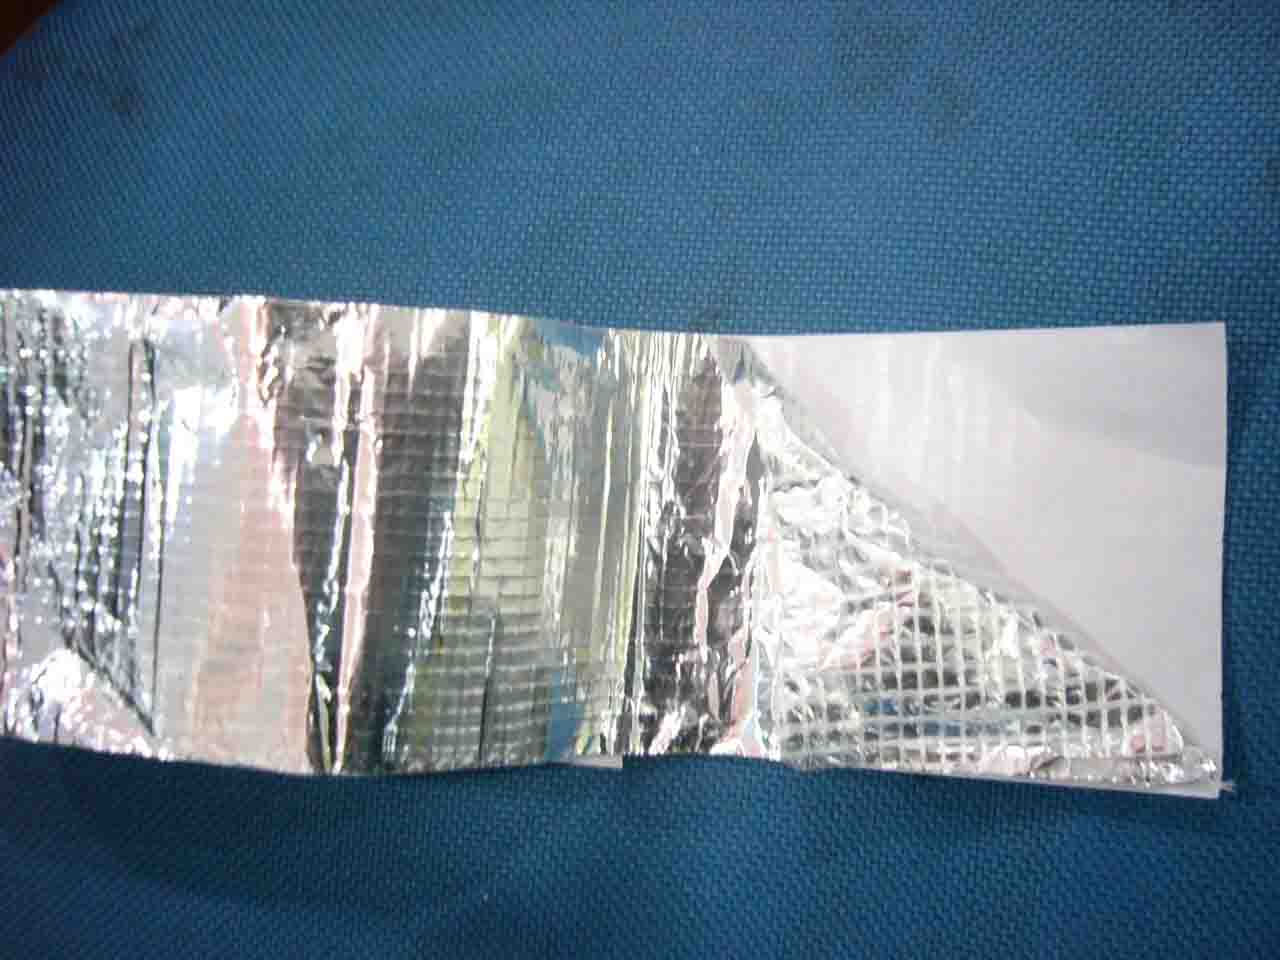  Aluminum Tape With Glass